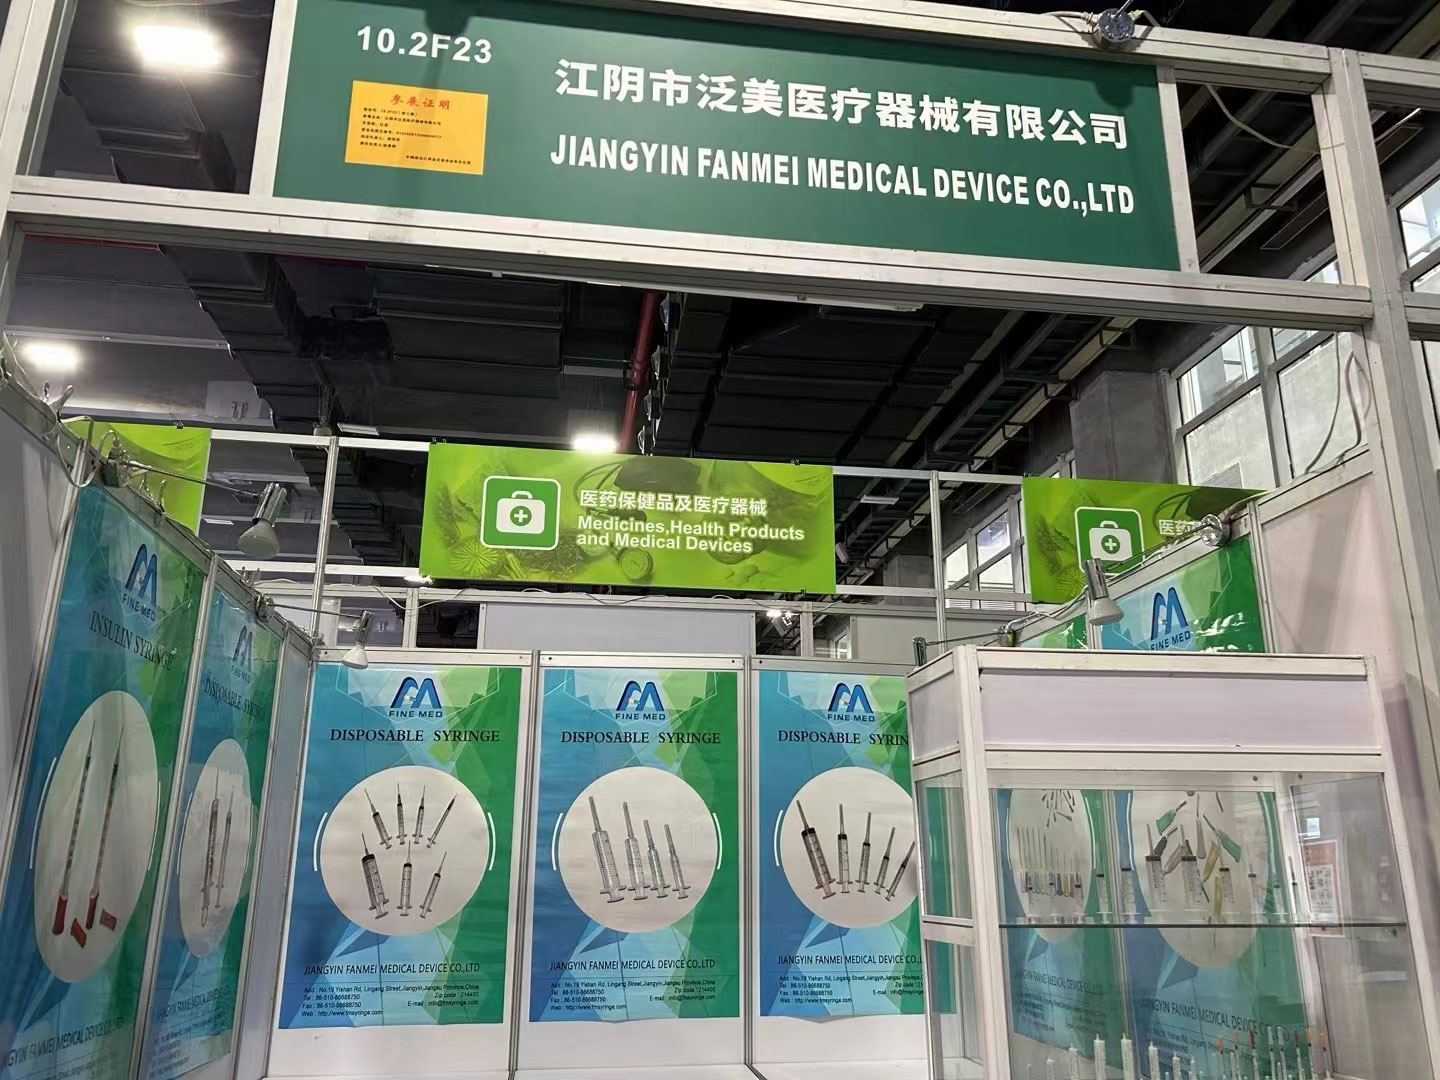 Fanmei welcomes you Canton fair:10.2 F23 from 5.1-5.5